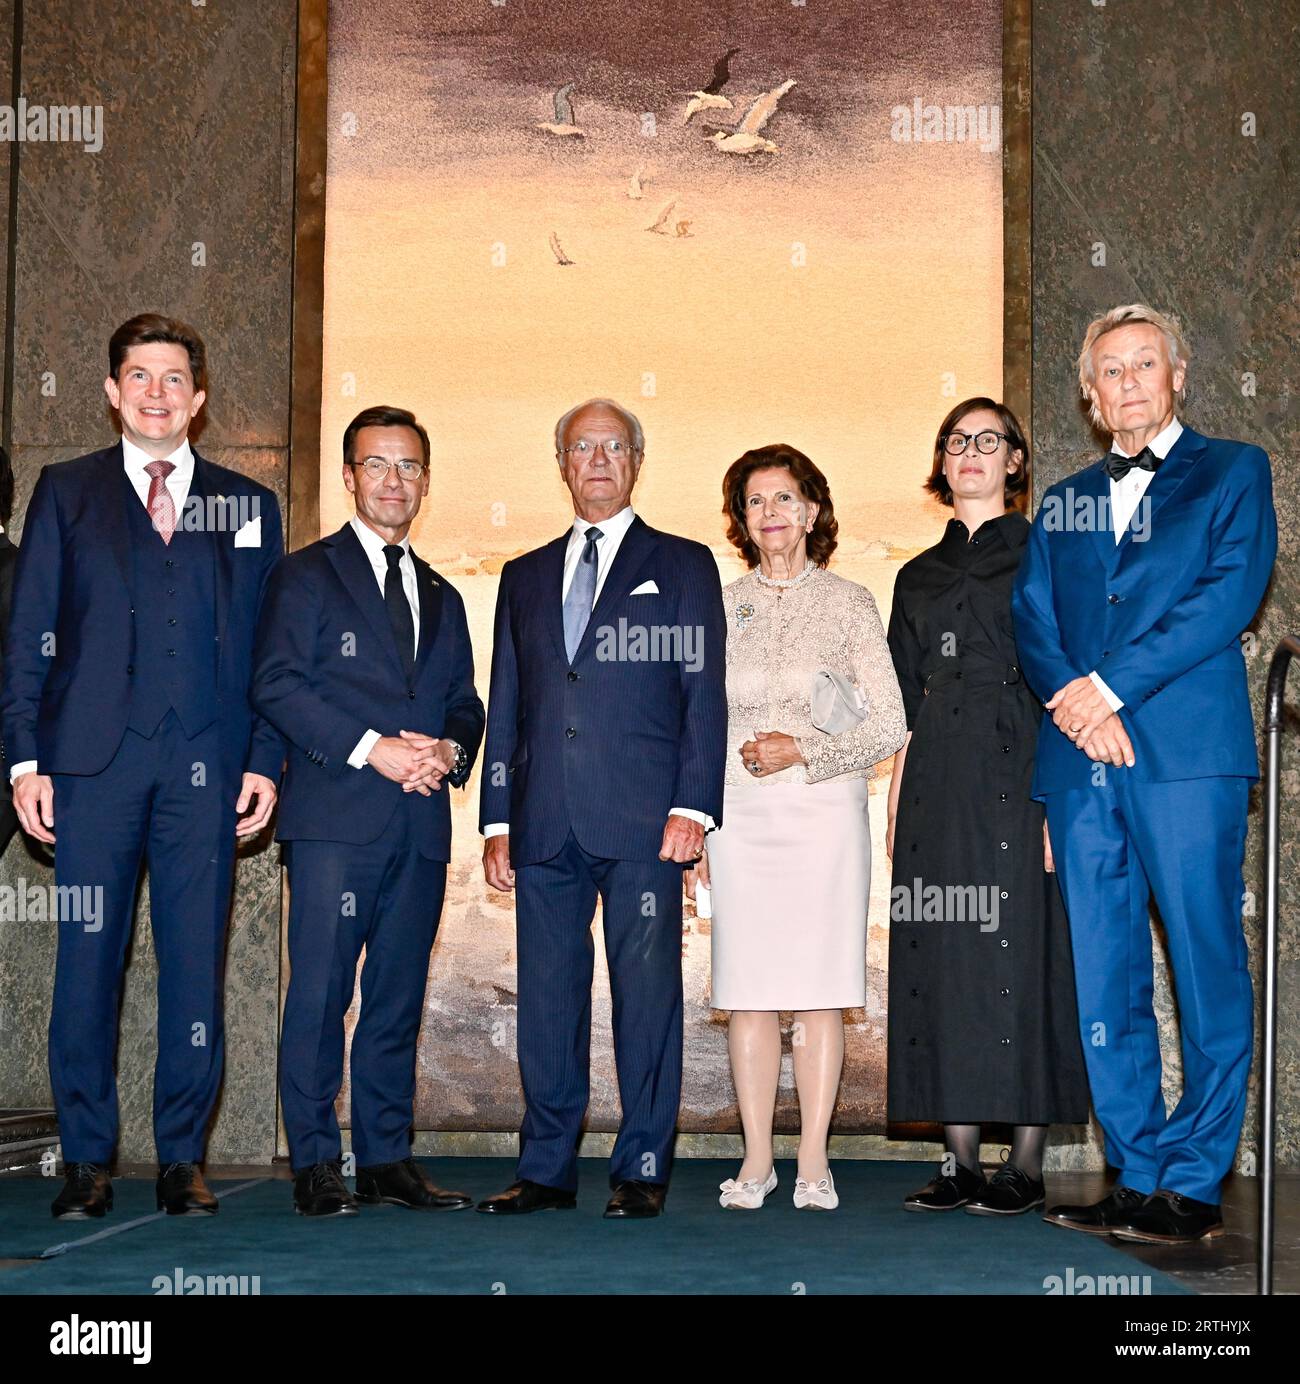 STOCKHOLM 20230913 (L-R) Parliament Speaker Andreas Norlén, Prime Minister Ulf Kristersson, King Carl Gustaf, Queen Silvia, artists Frida Lindberg and Lars Lerin, at a reception at the Royal Palace in Stockholm where a gift from the parliament and government was handed over to the King, who celebrates 50 years on the throne. The gift is an eight-square meter fabric made after a watercolor painting by Swedish artist Lars Lerin. Frida Lindberg has been artistic director and weavers have been Ebba Bergström and Tova Vibrandt. Photo: Jonas Ekstromer/TT/code 10030 Stock Photo